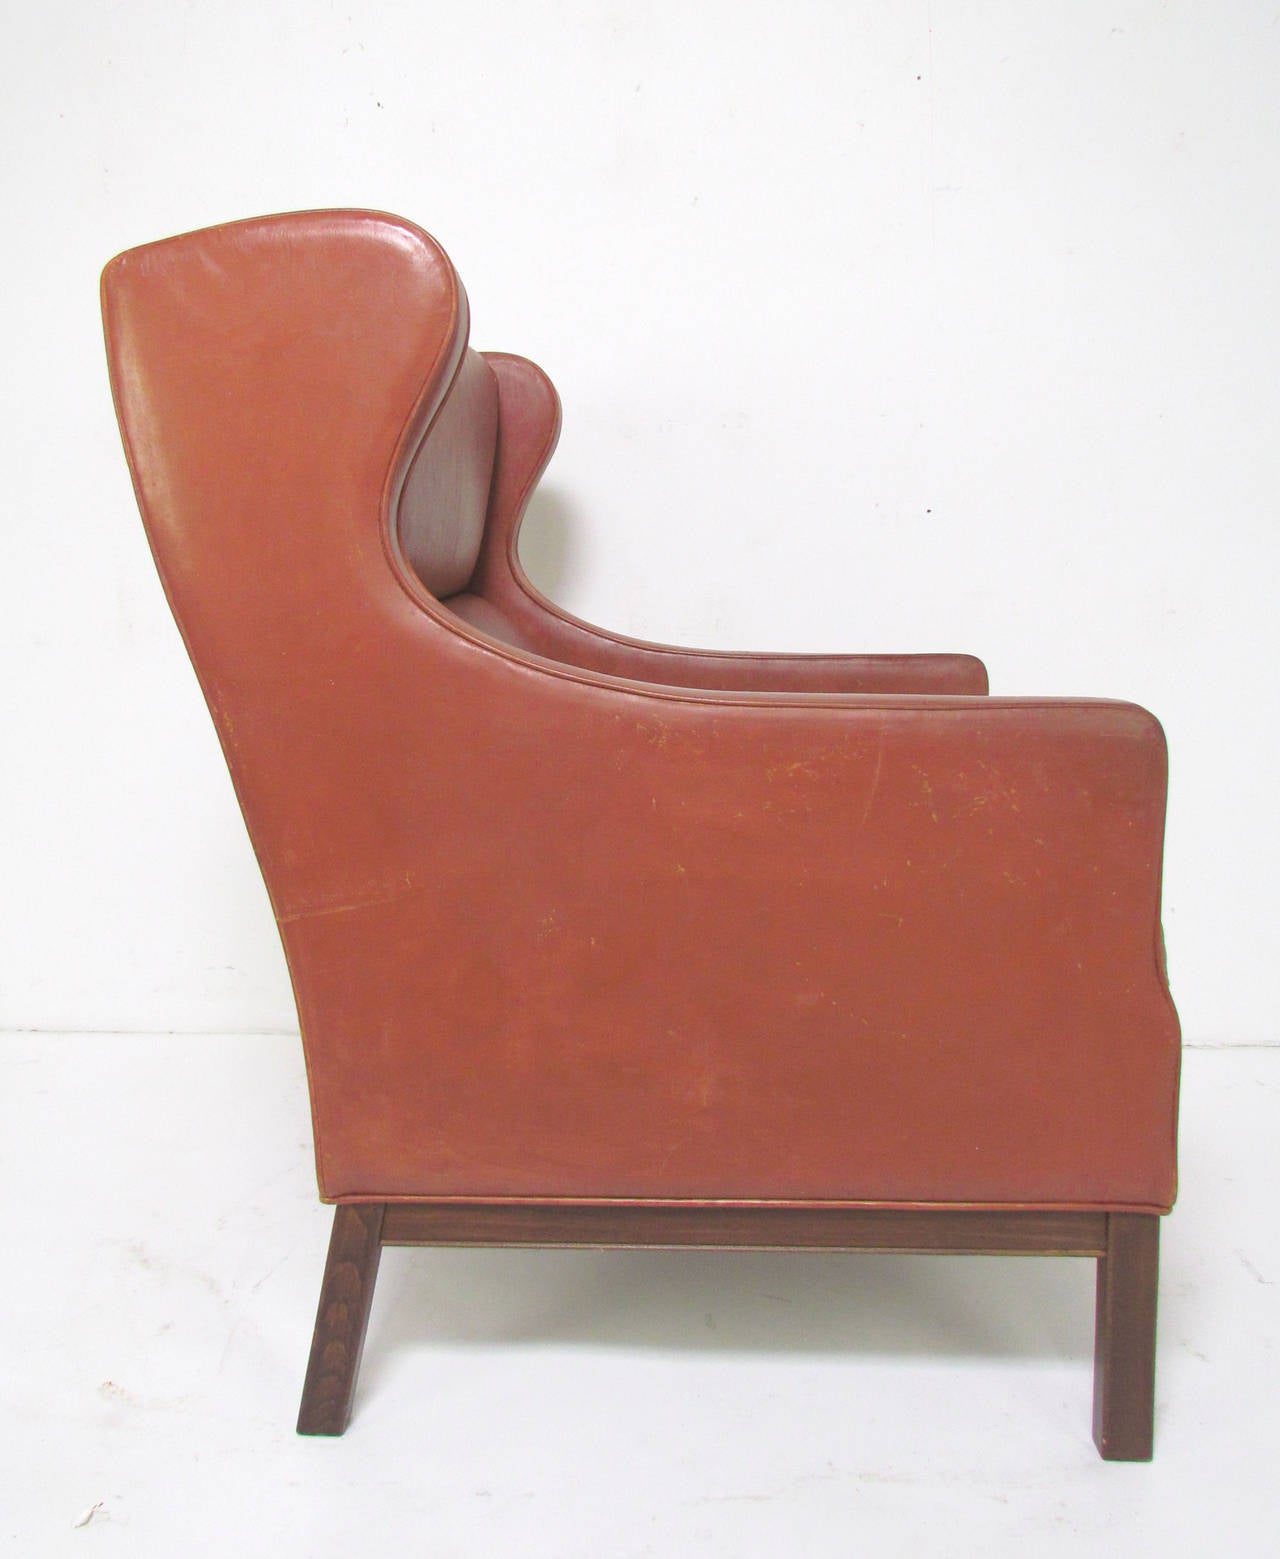 Danish wingback lounge armchair in original leather upholstery, in the manner of Børge Mogensen, circa 1950s. The original leather is distressed but still quite handsome. Rosewood legs and frame.